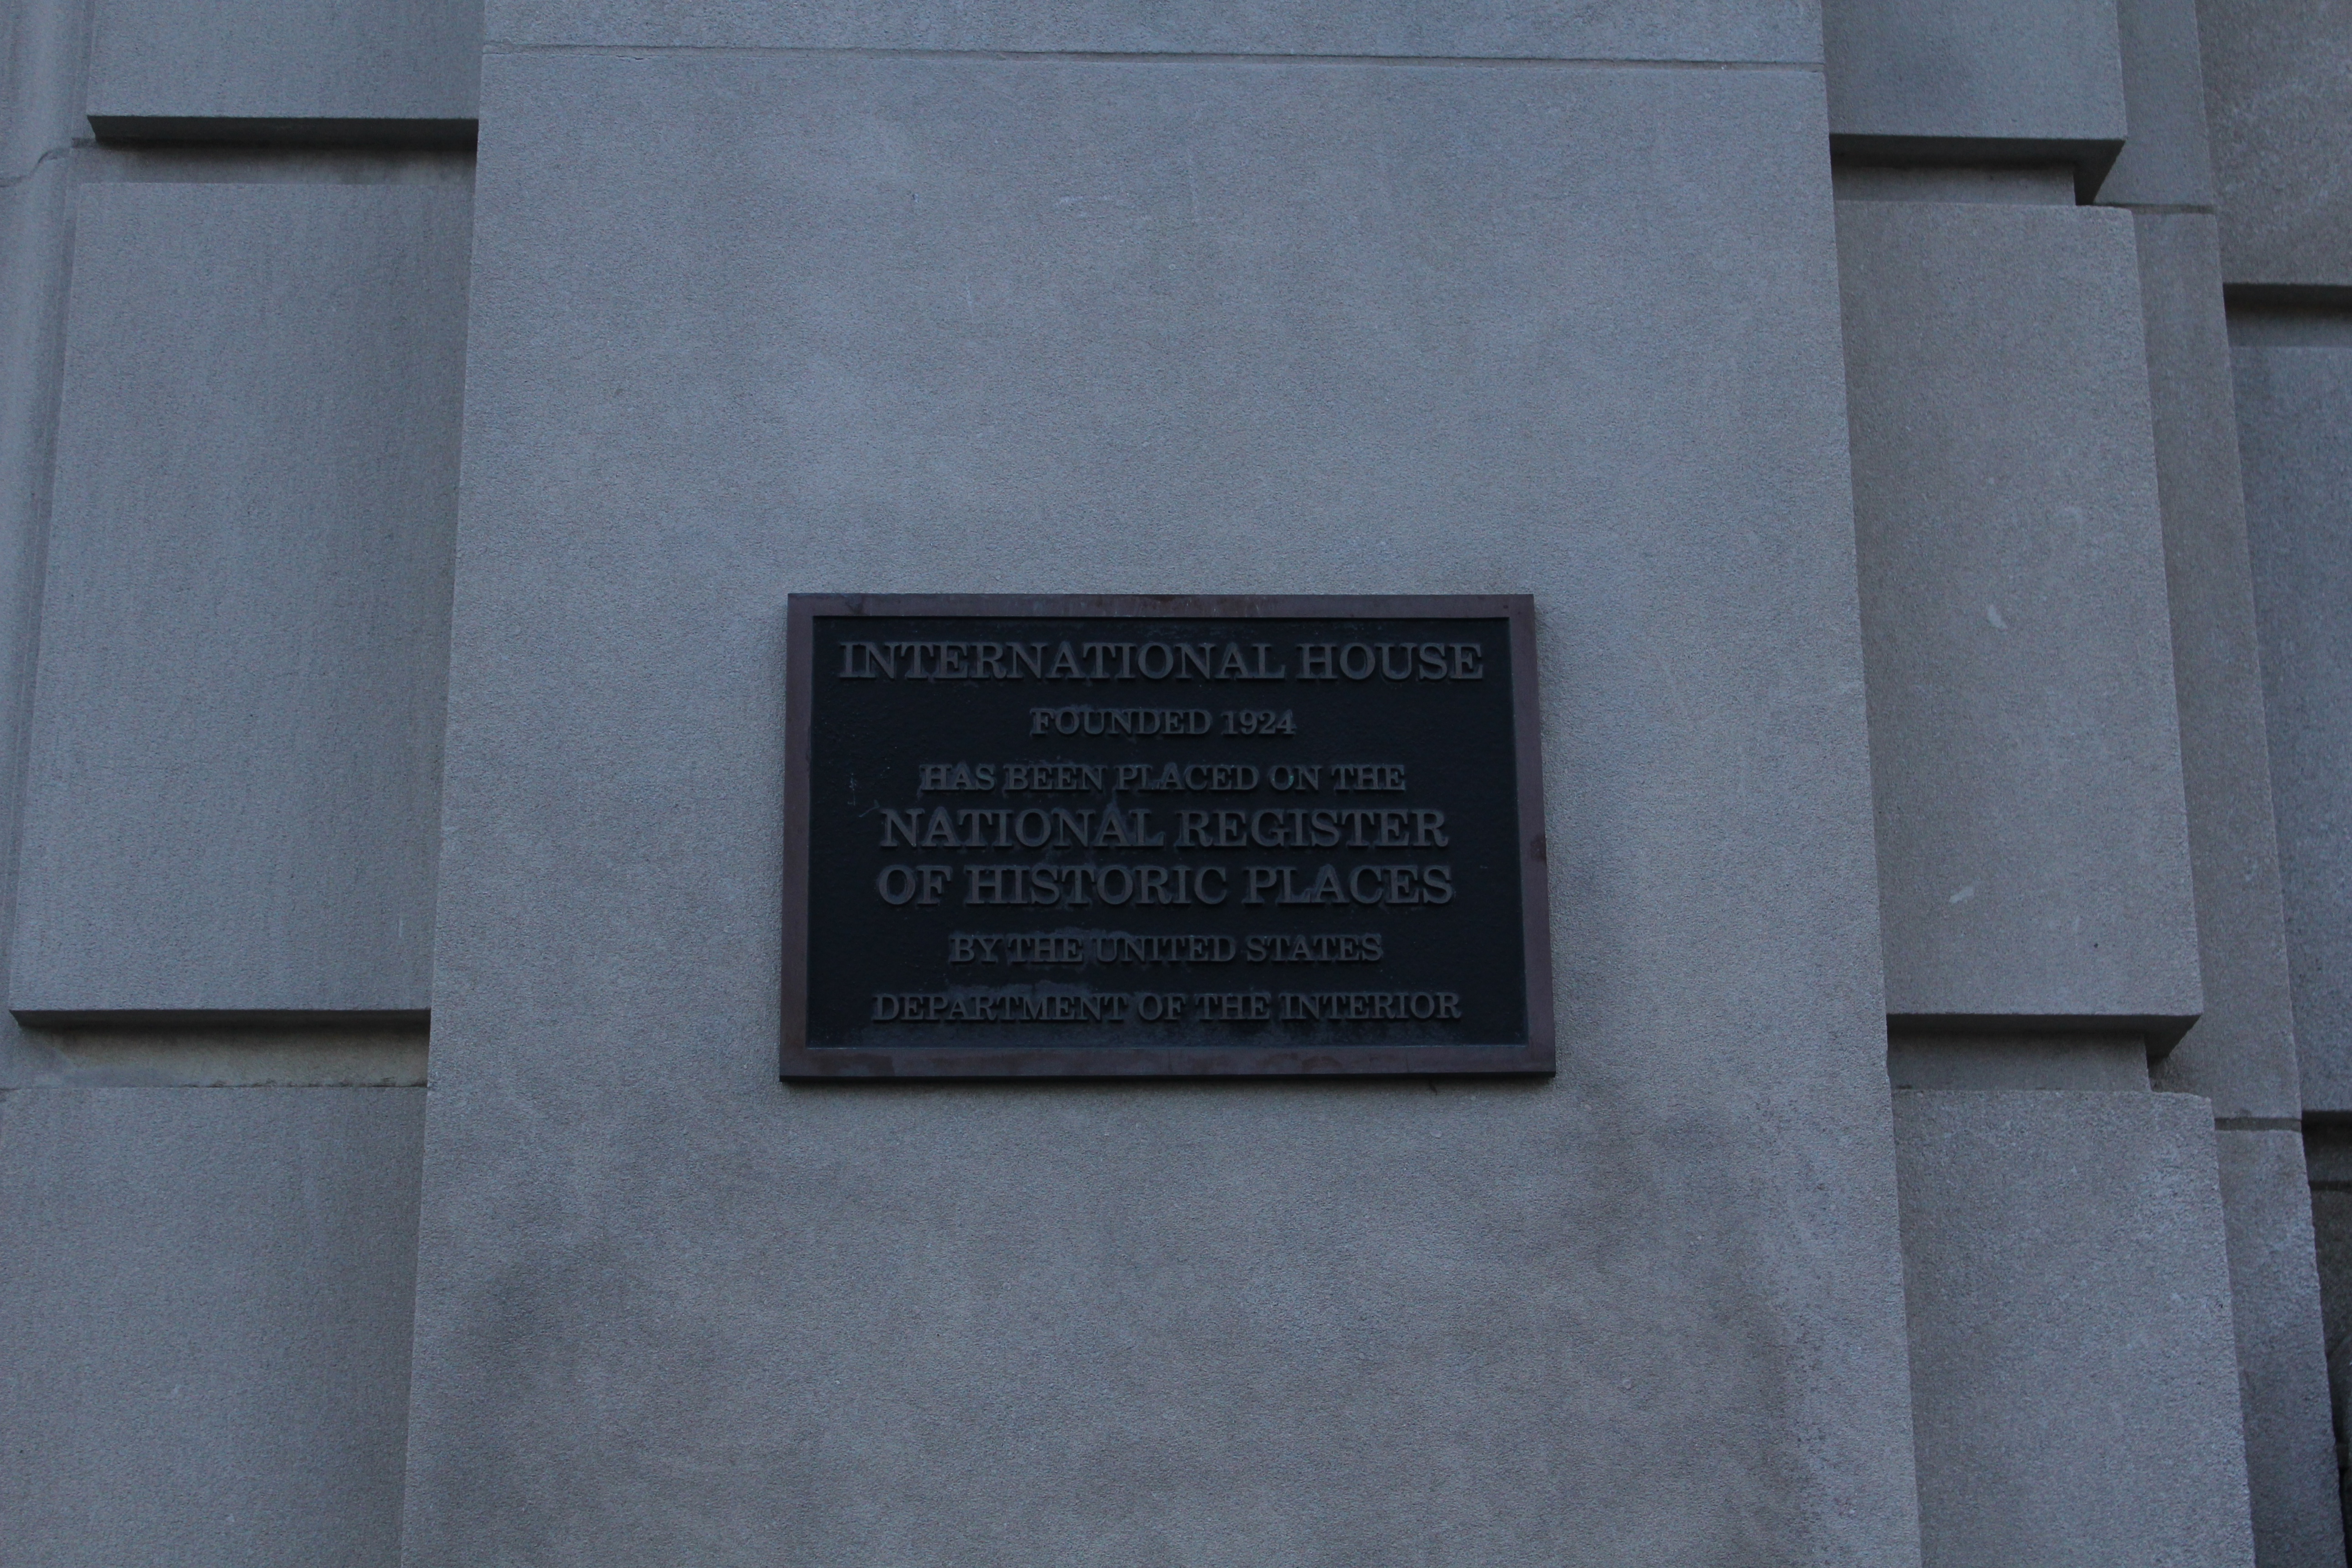 A Plaque reads "INTERNATIONAL HOUSE
FOUNDED 1924
HAS BEEN PLACED ON THE NATIONAL REGISTER 
OF HISTORIC PLACES
BY THE UNITED STATES
DEPARTMENT OF THE INTERIOR"